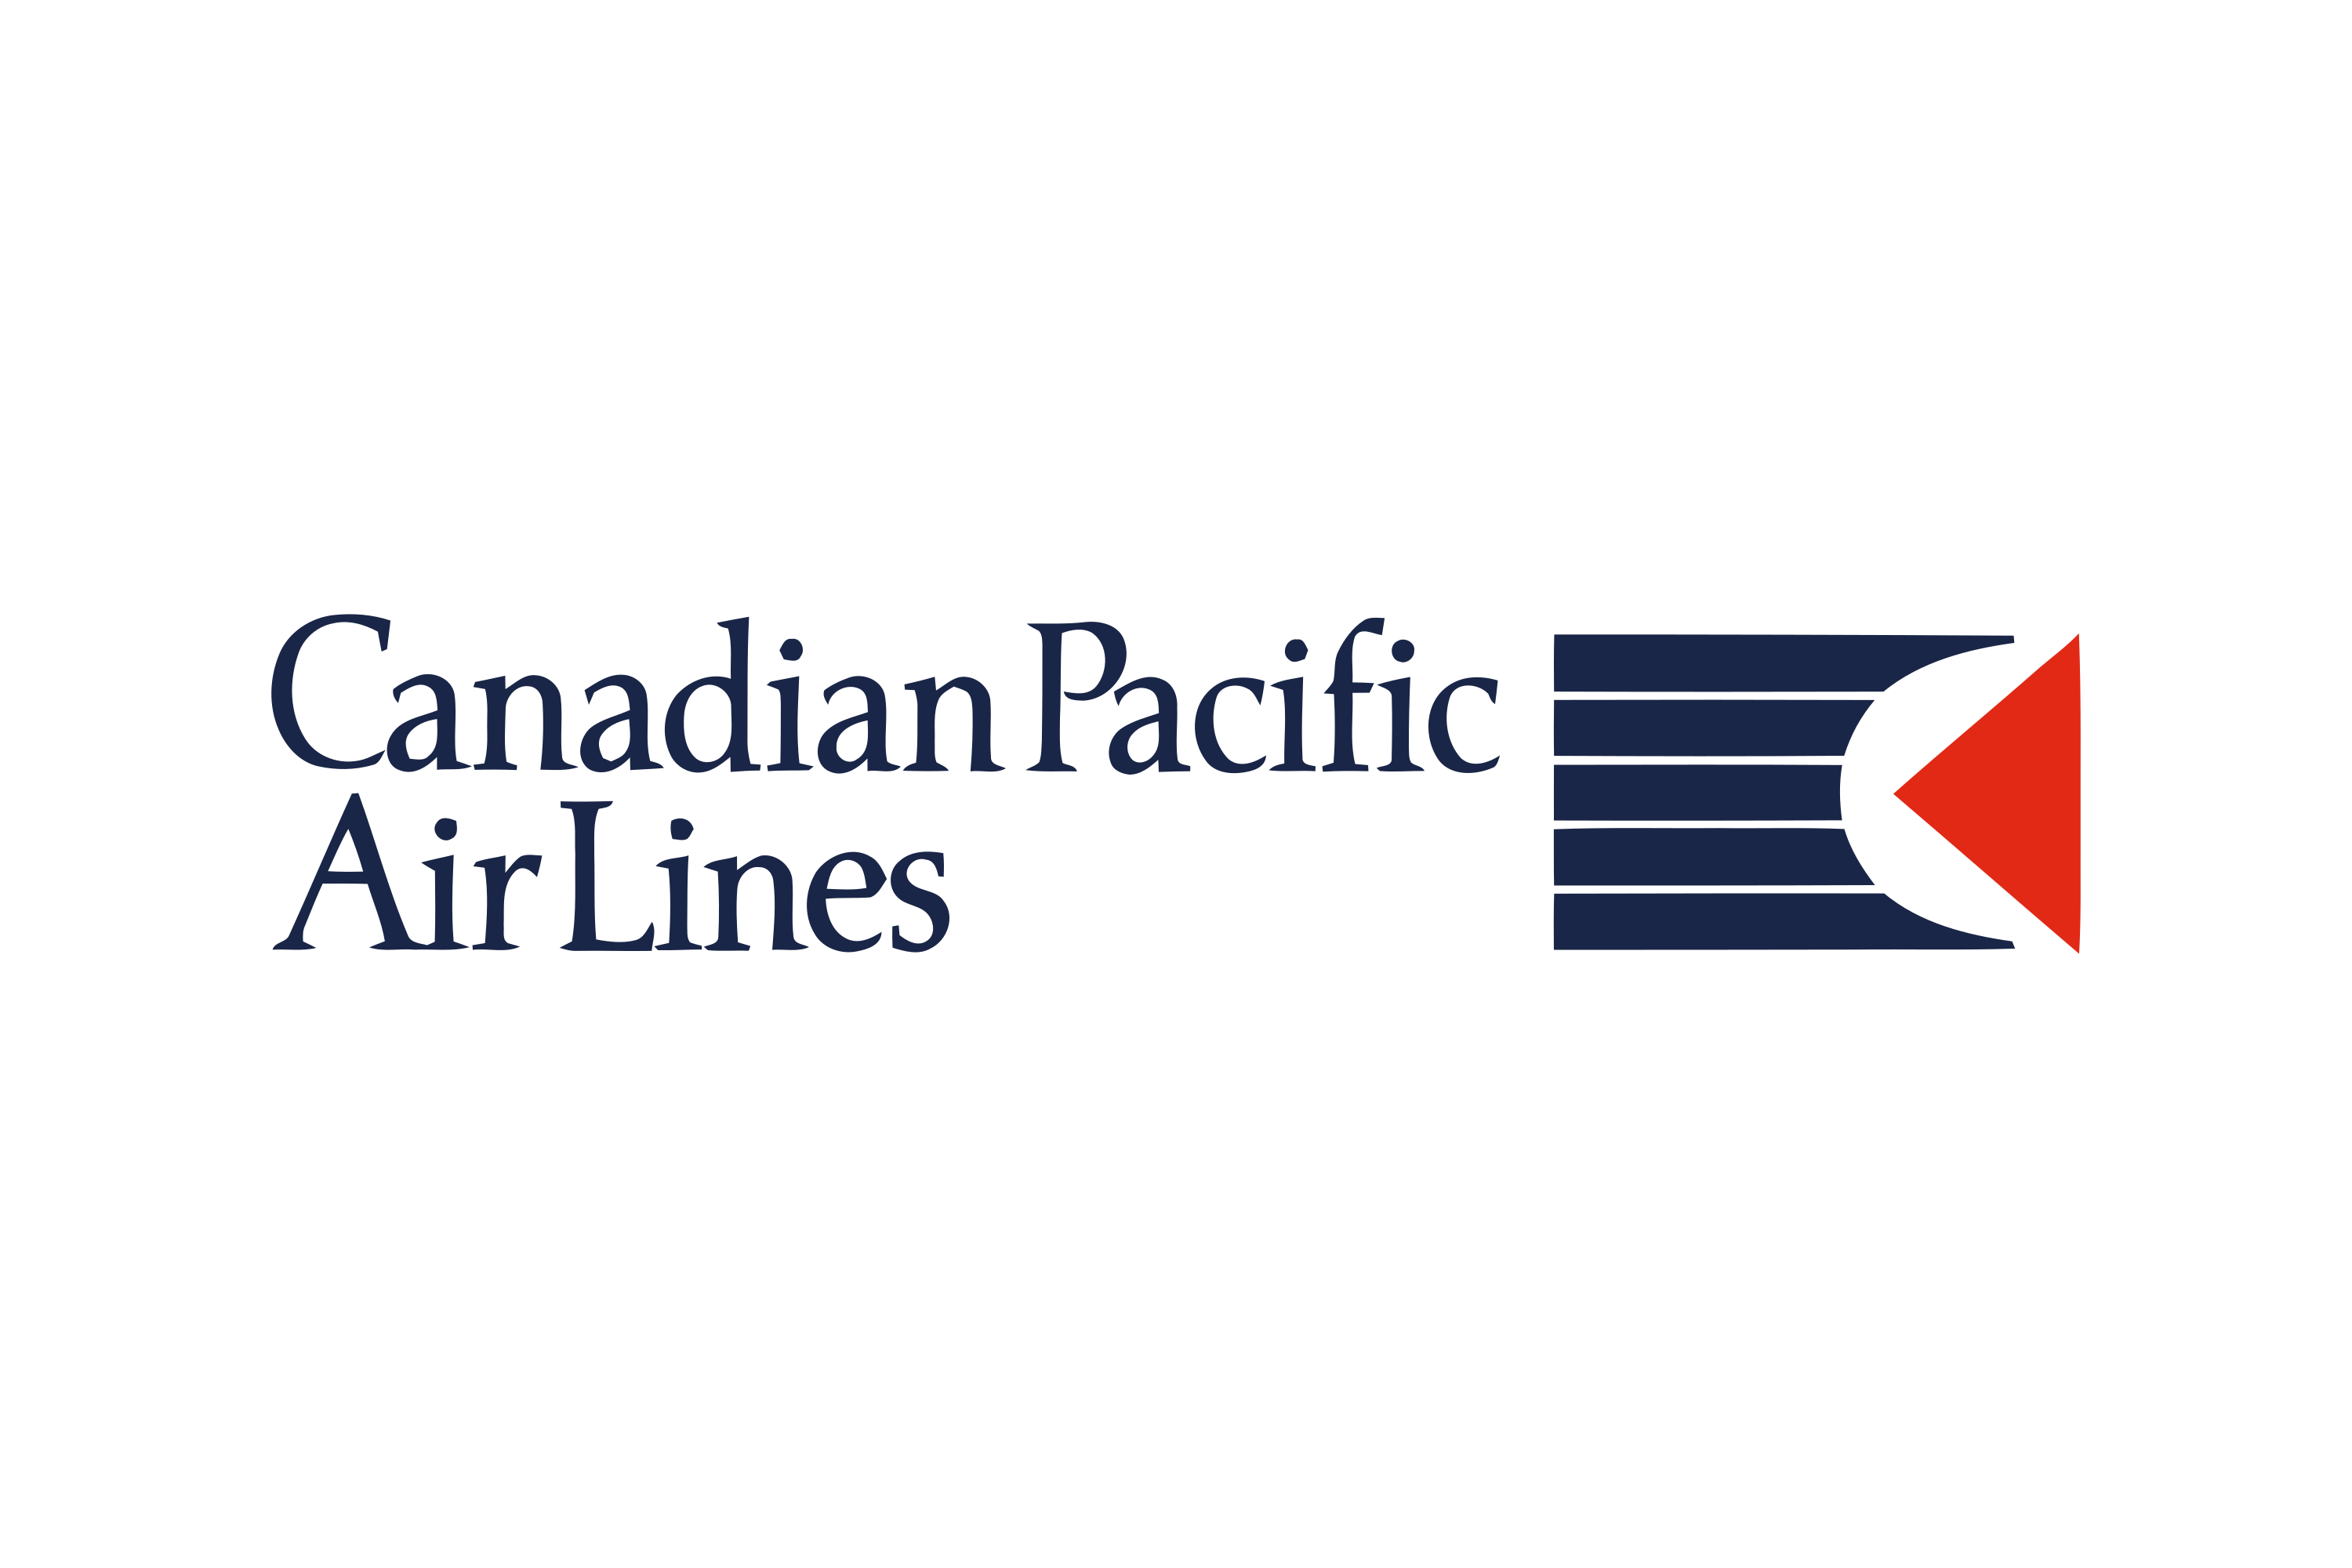 Download Canadian Pacific Air Lines Logo in SVG Vector or PNG File ...